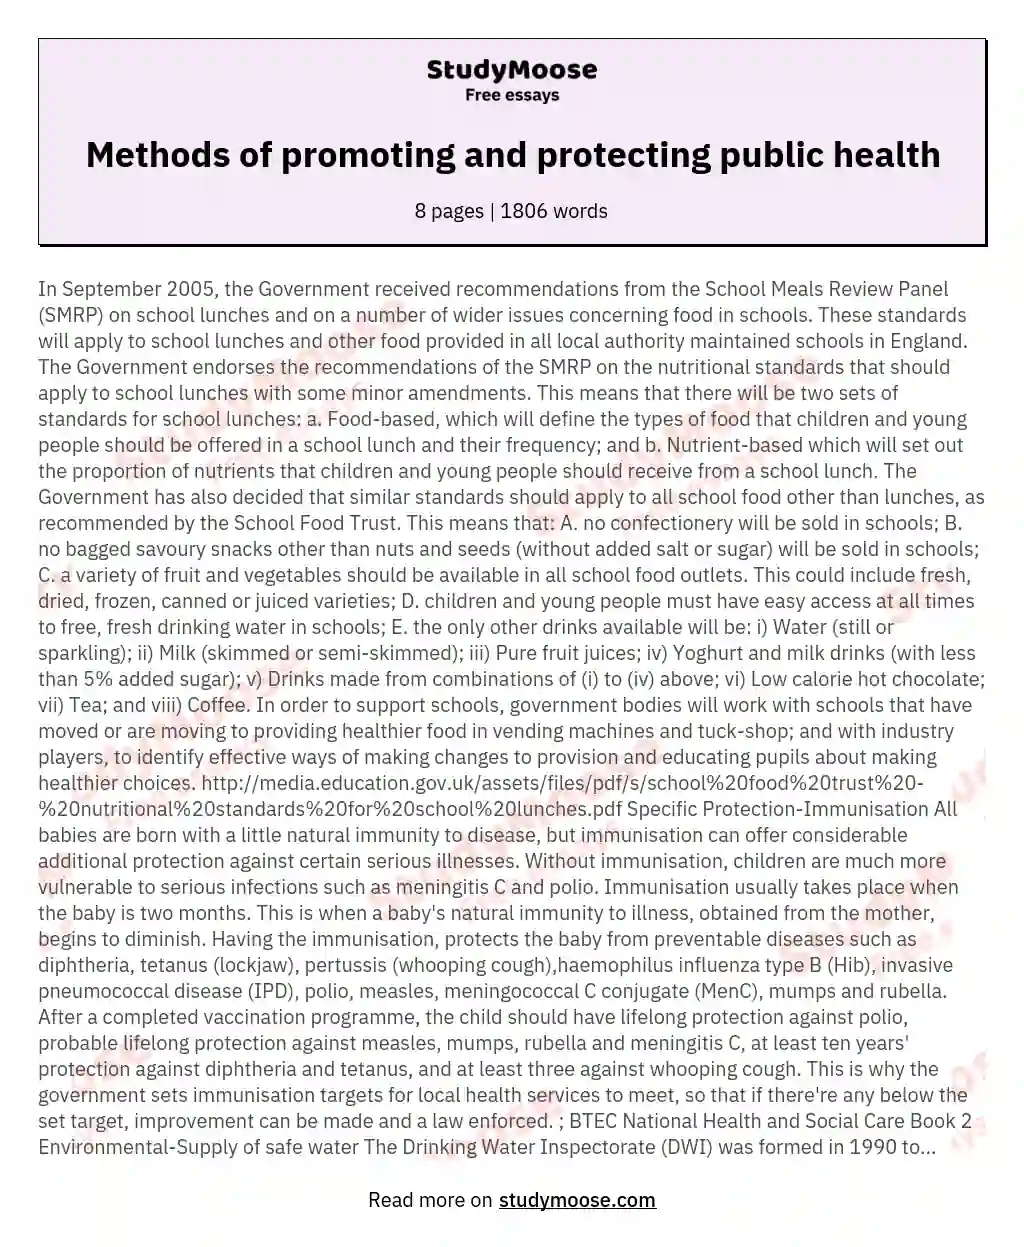 Methods of promoting and protecting public health